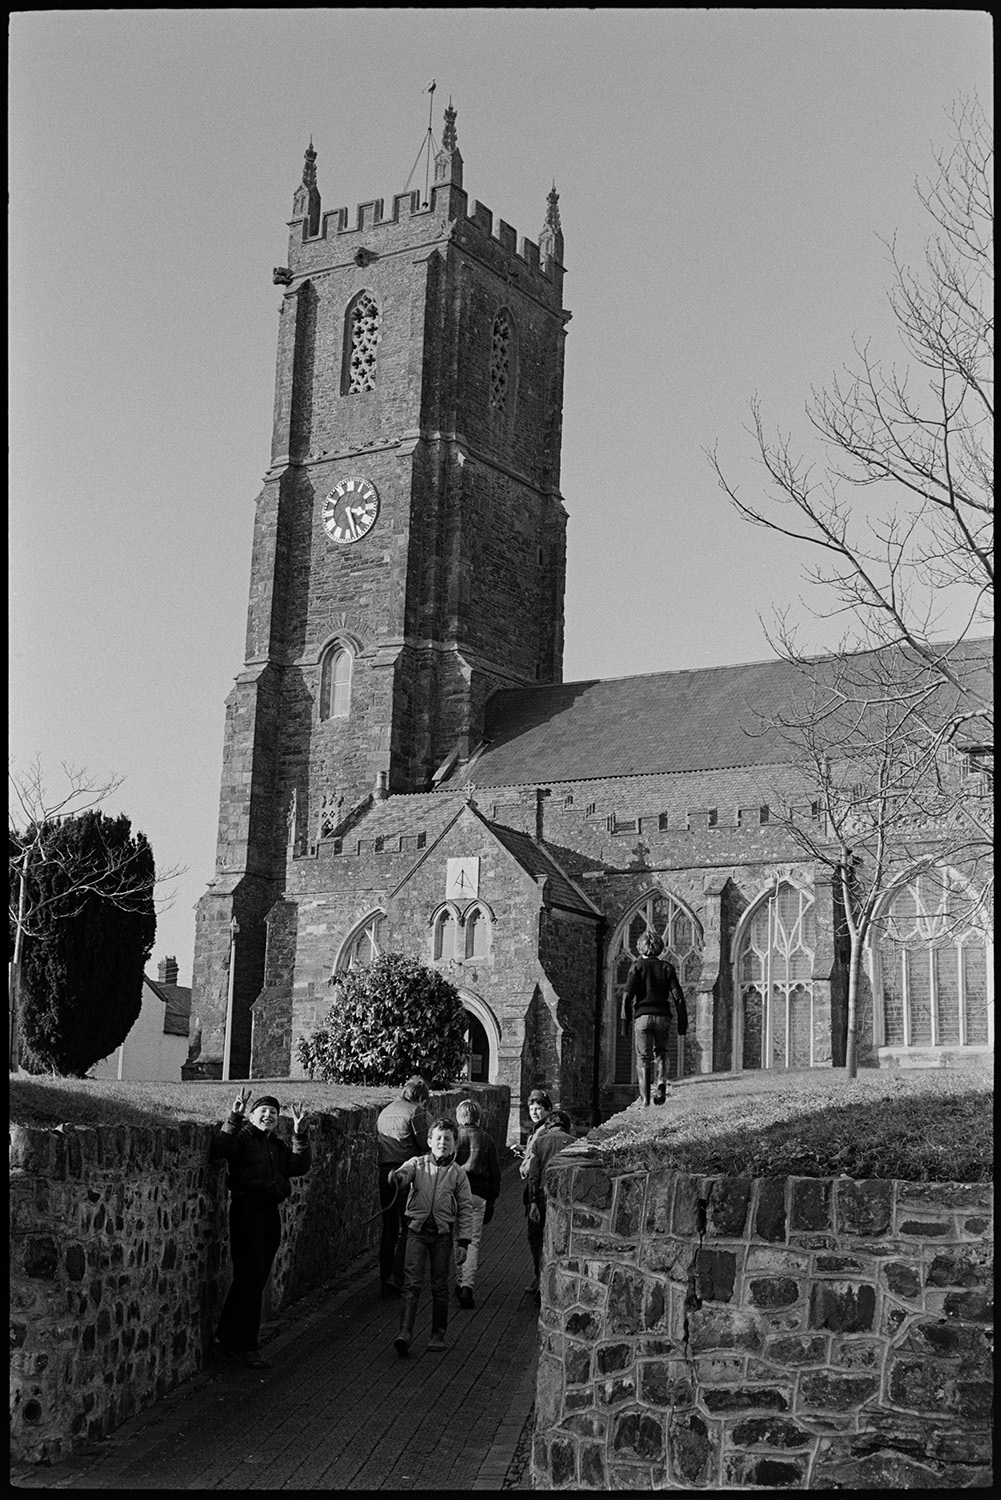 Church with tower. 
[A group of boys walking long the church path through the churchyard towards South Molton Church. Some of them are waving at the camera. The church porch and clock on the church tower are also visible.]